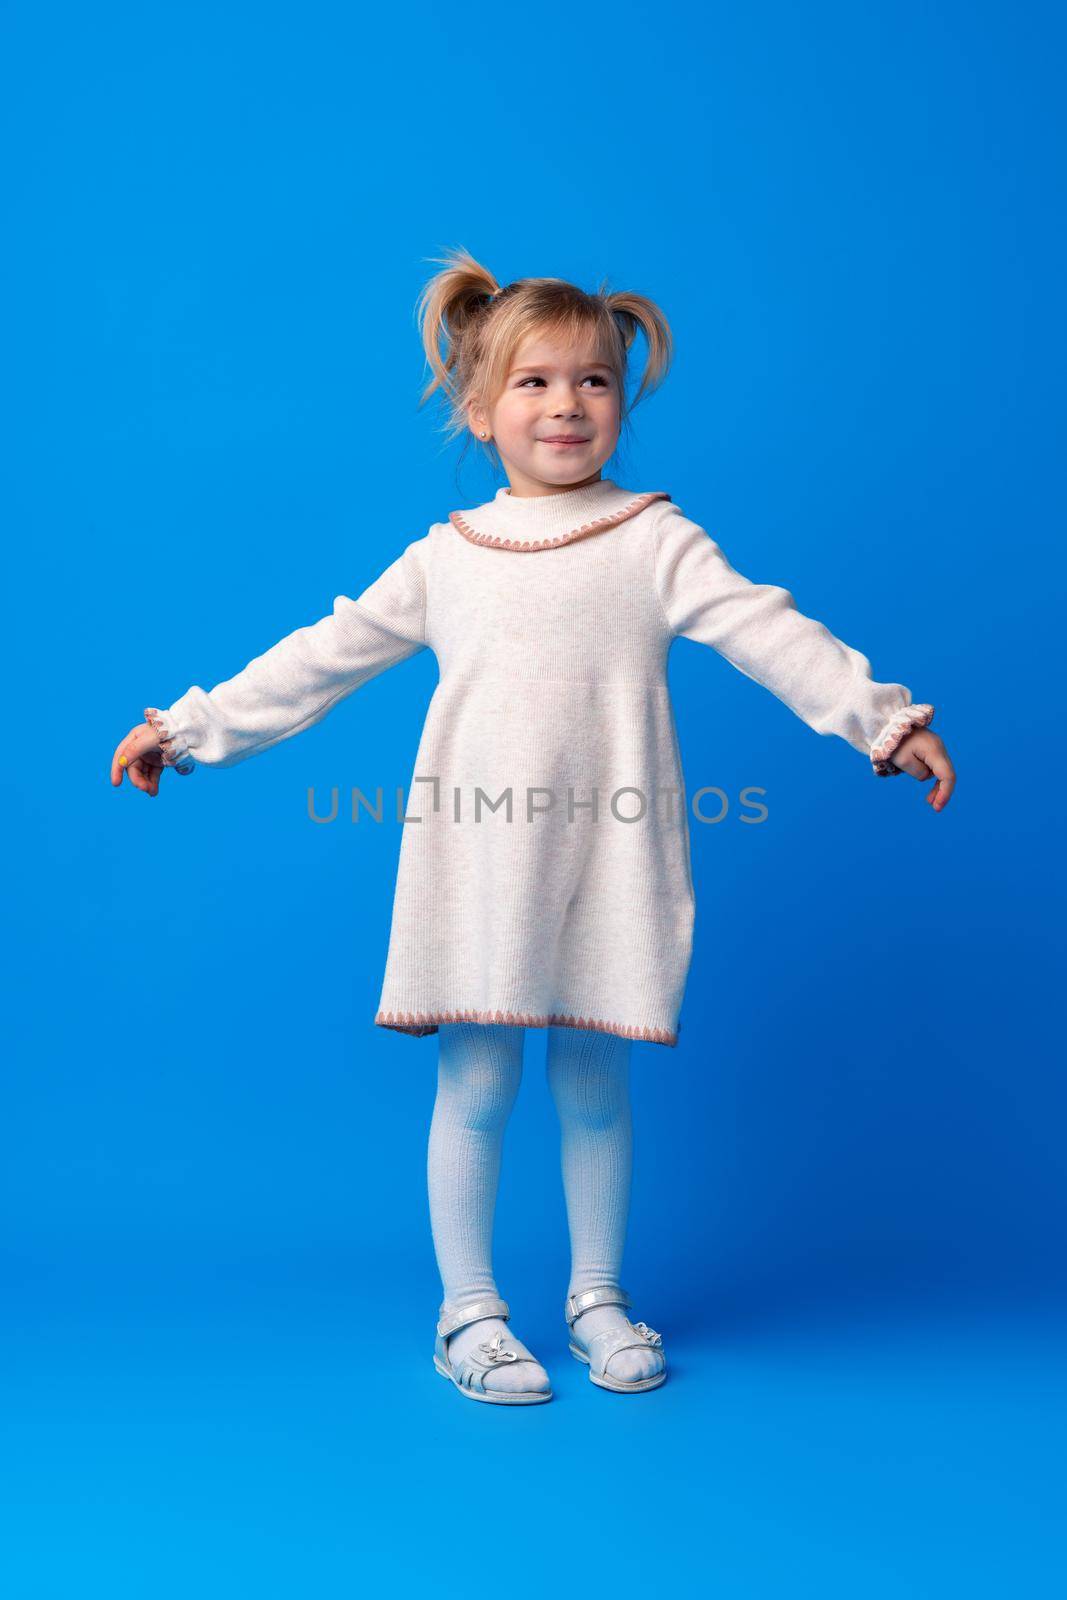 Full length portrait of a little girl standing on blue backgorund, close up